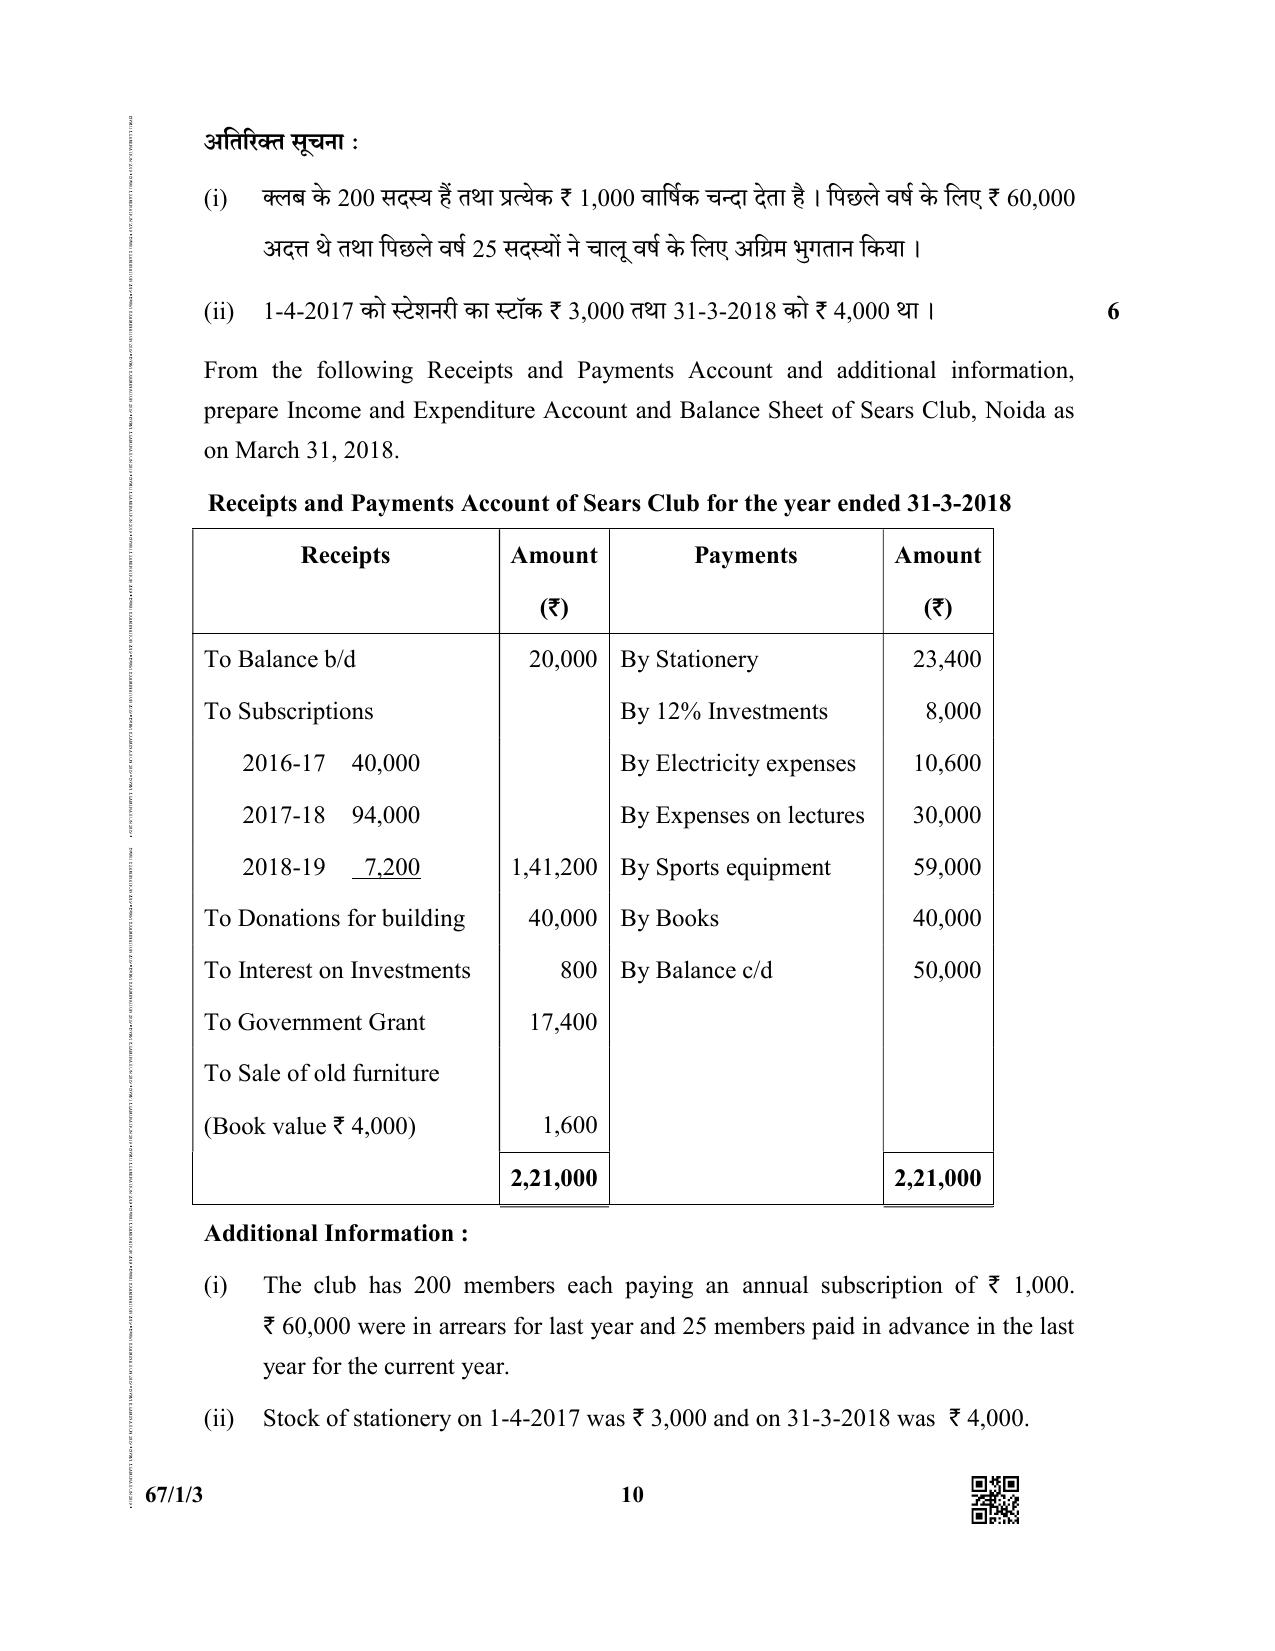 CBSE Class 12 67-1-3  (Accountancy) 2019 Question Paper - Page 10